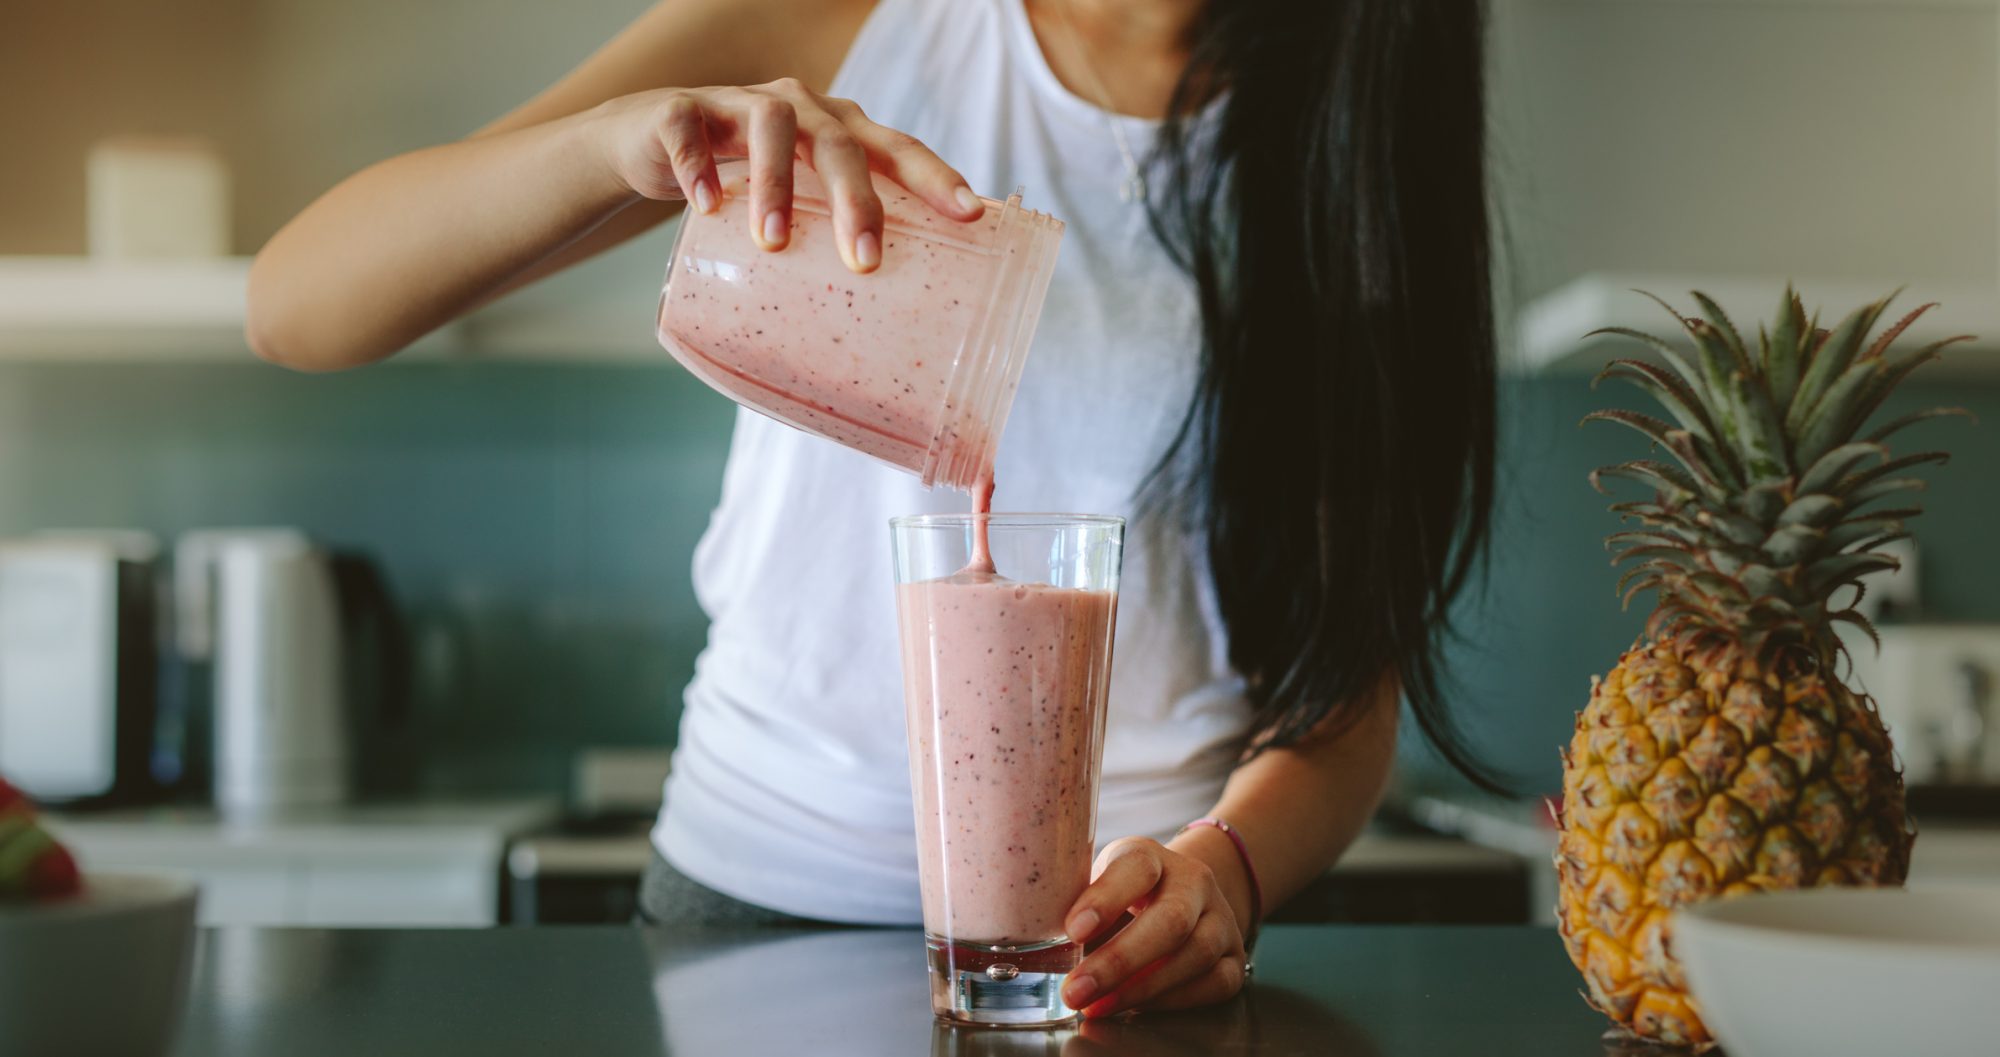 National Frozen Food Month: Smoothie Recipes & More!